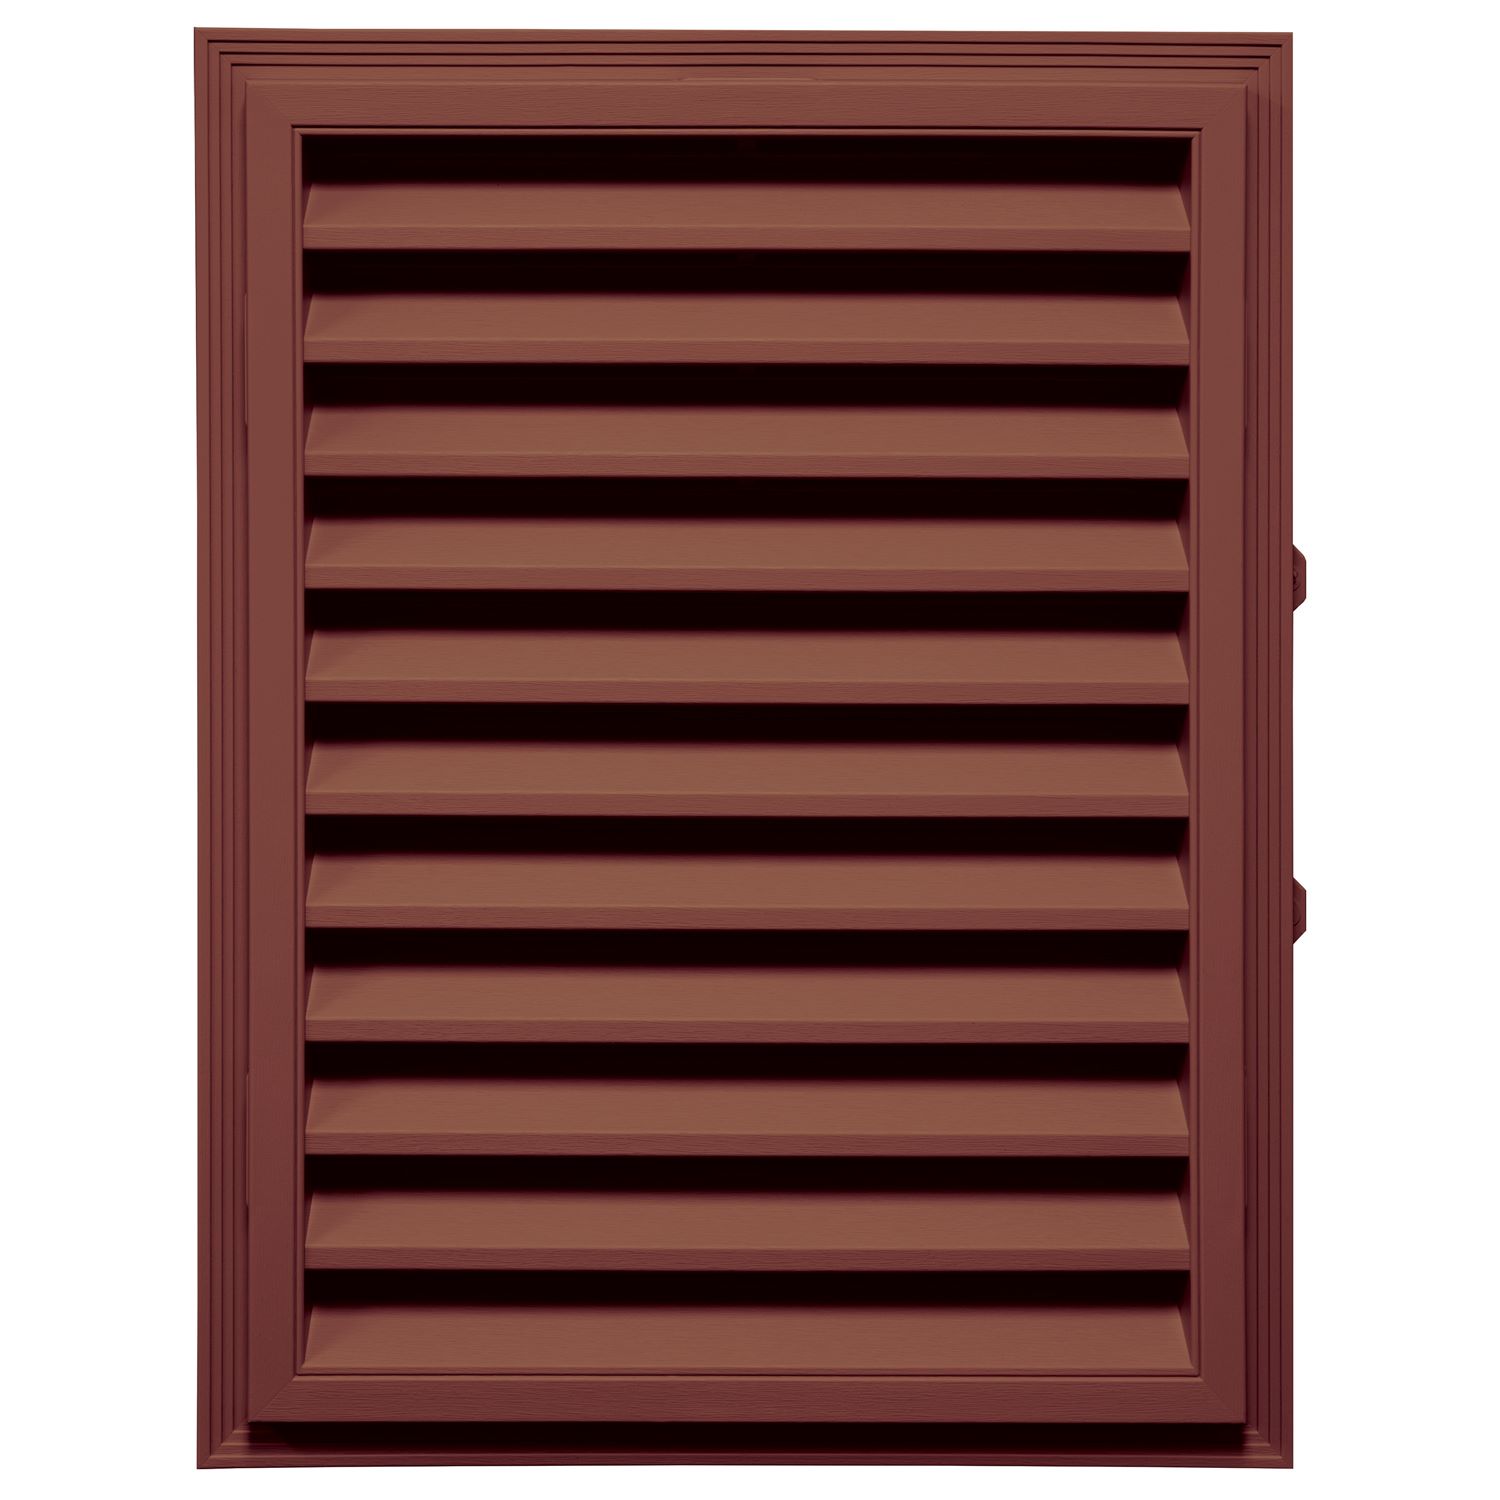 Product 18in. x 24in. - 205 Barn Red